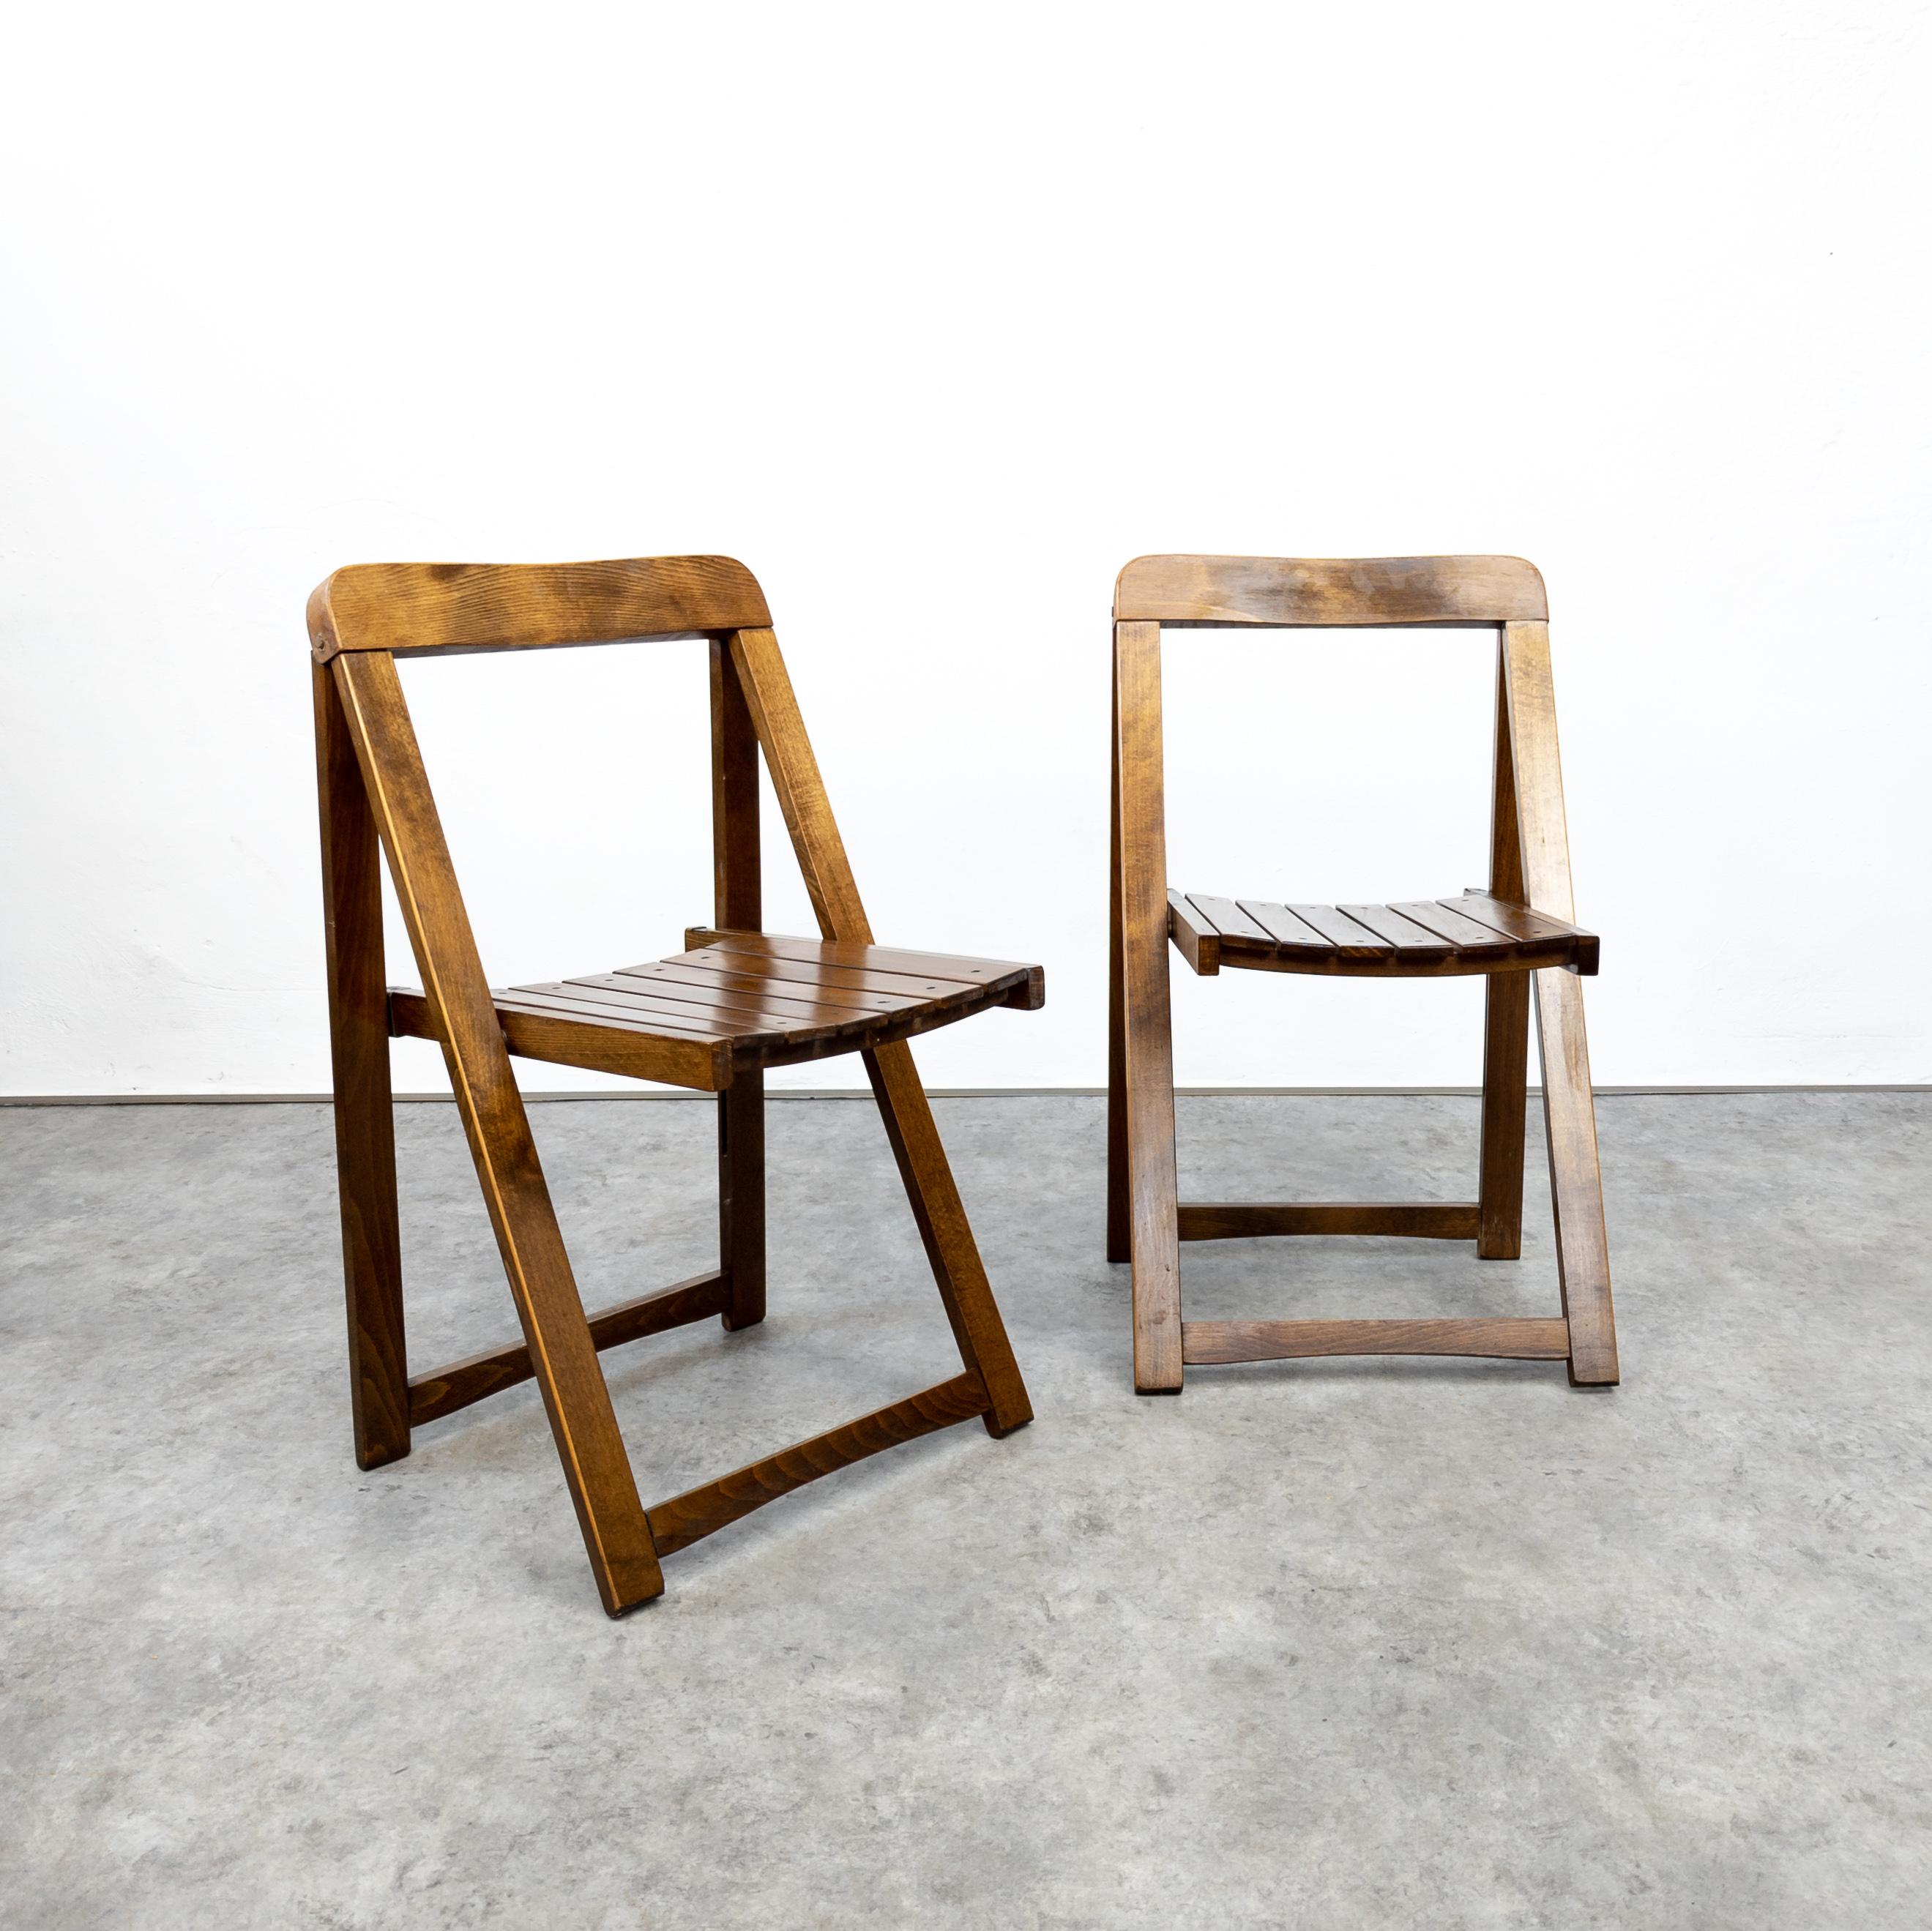 Mid-20th Century Set of 4 Vintage Folding Chairs by Aldo Jacober for Alberto Bazzani